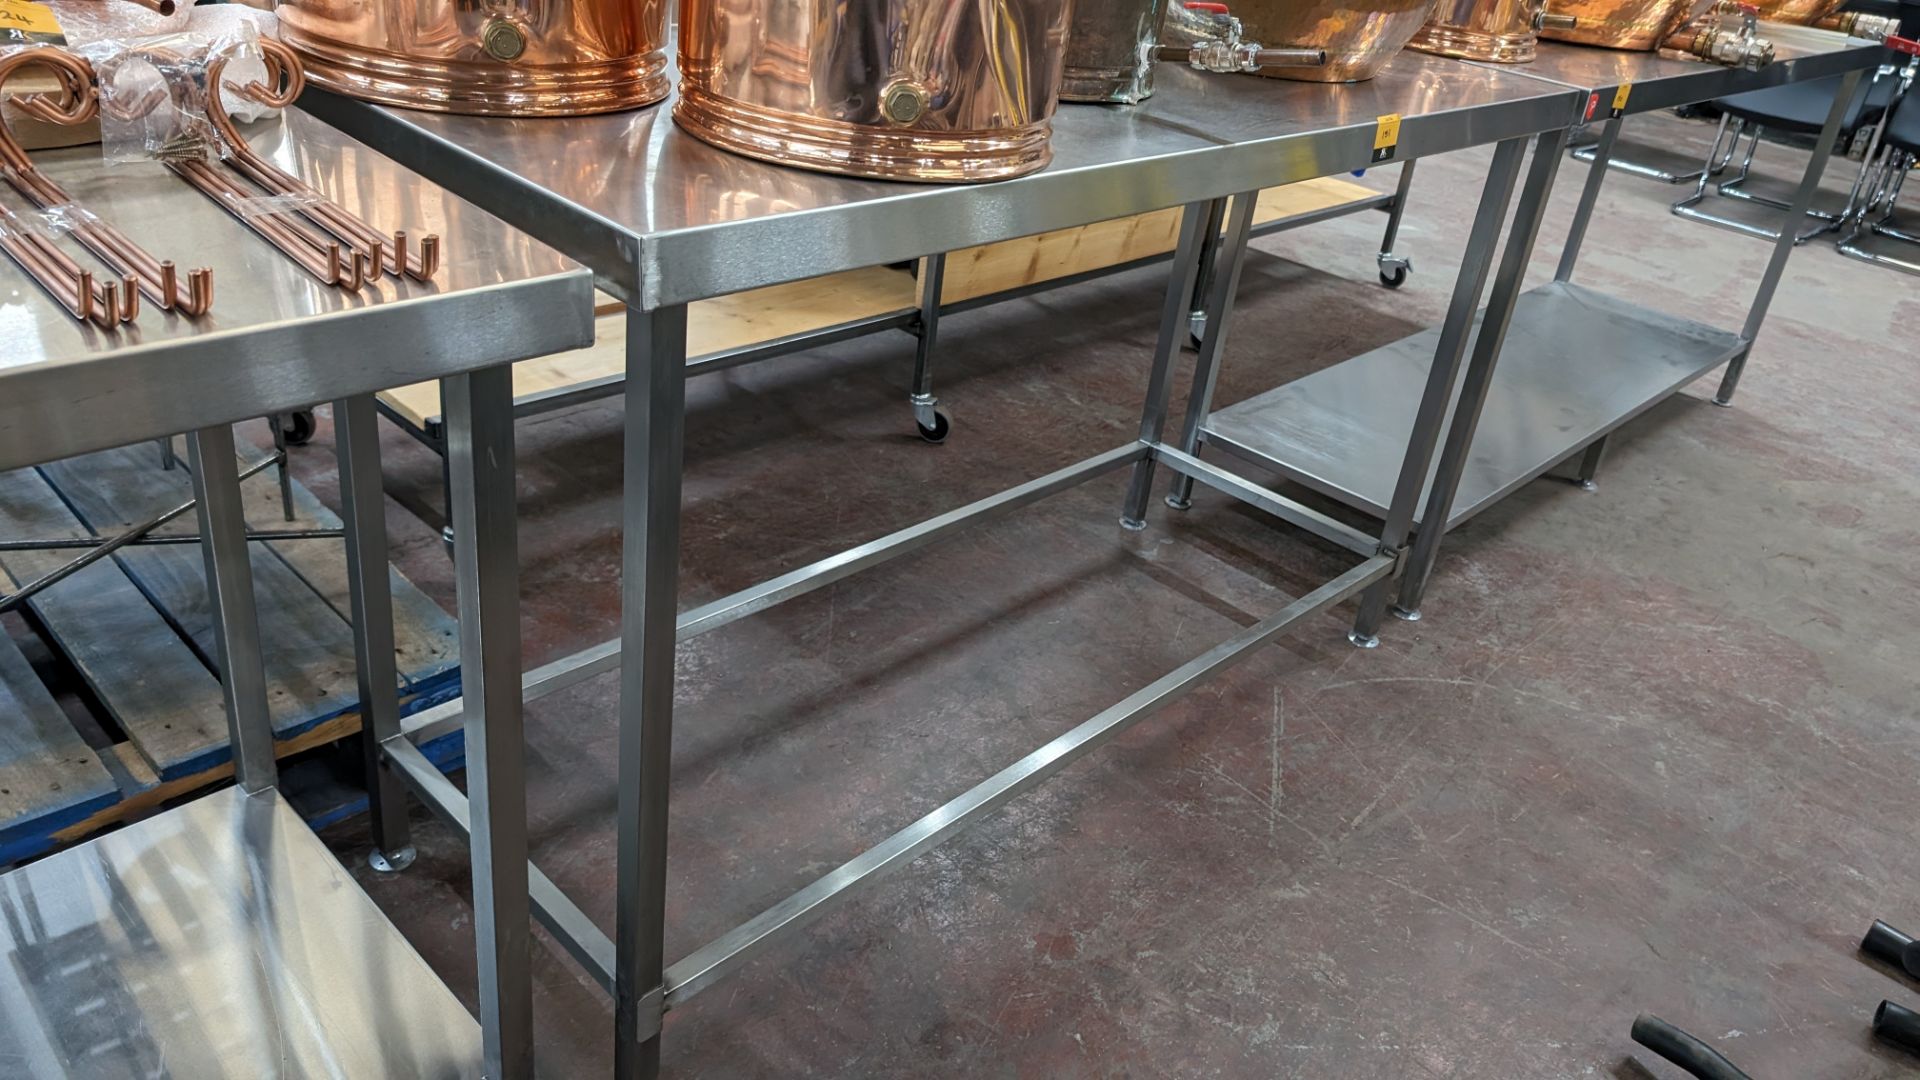 Stainless steel table with upstand at rear, max dimensions: 920mm x 600mm x 1300mm - Image 4 of 4